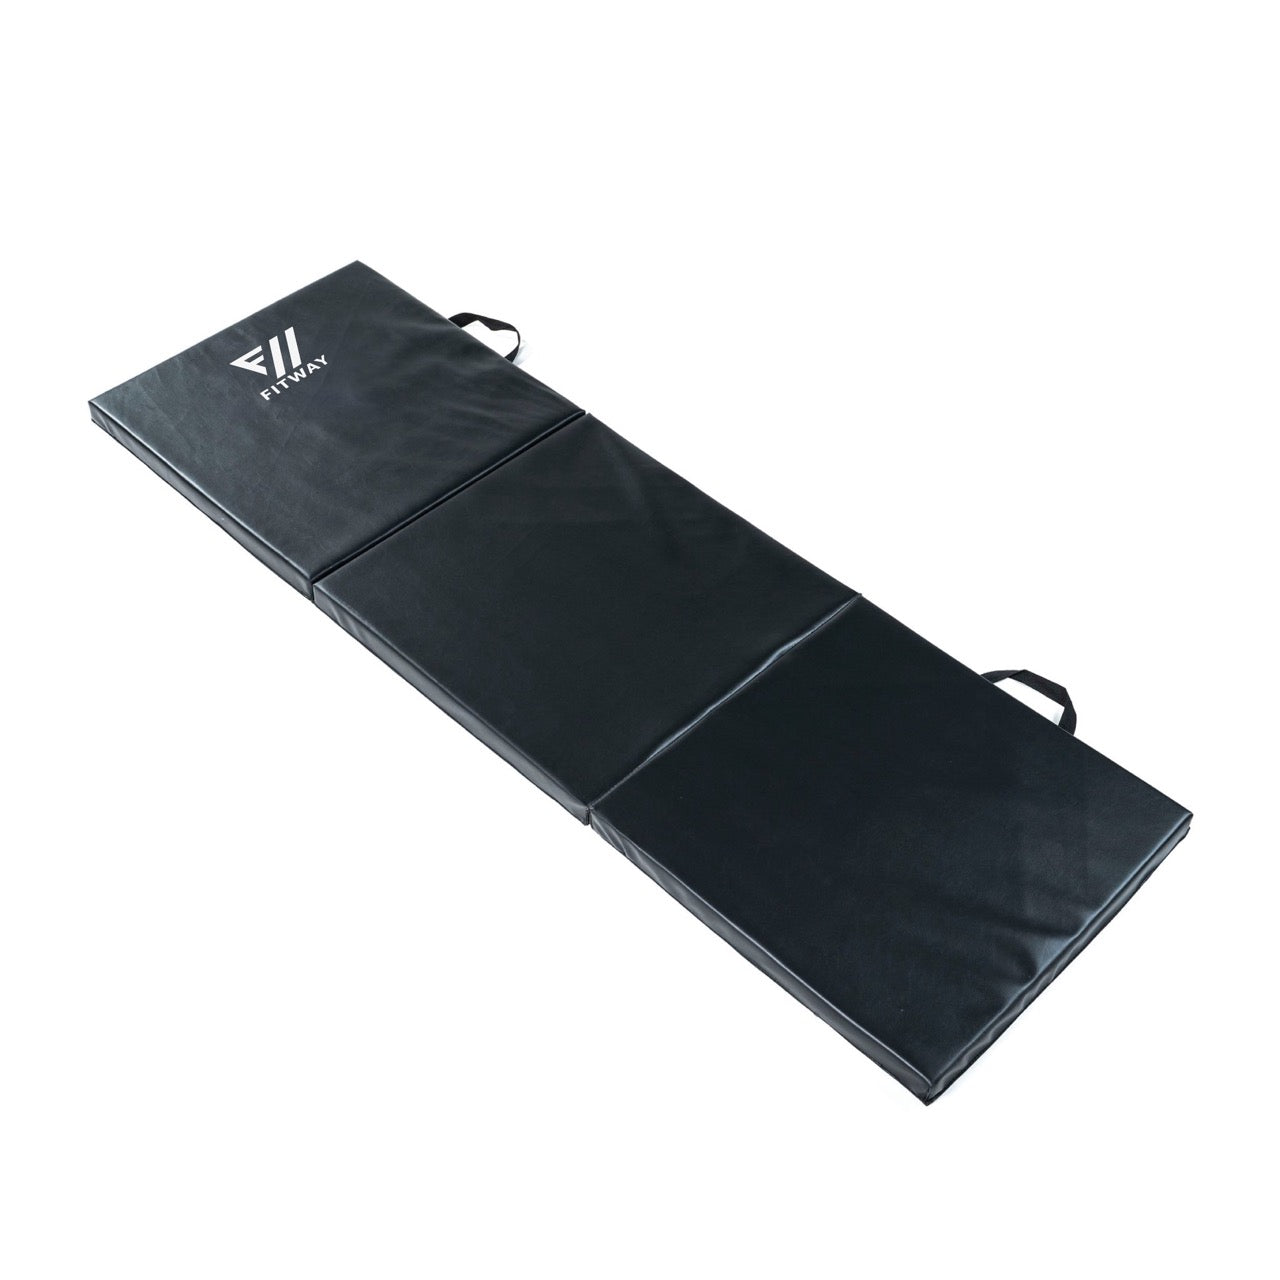 FitWay Equip. 5' Fitness Mat